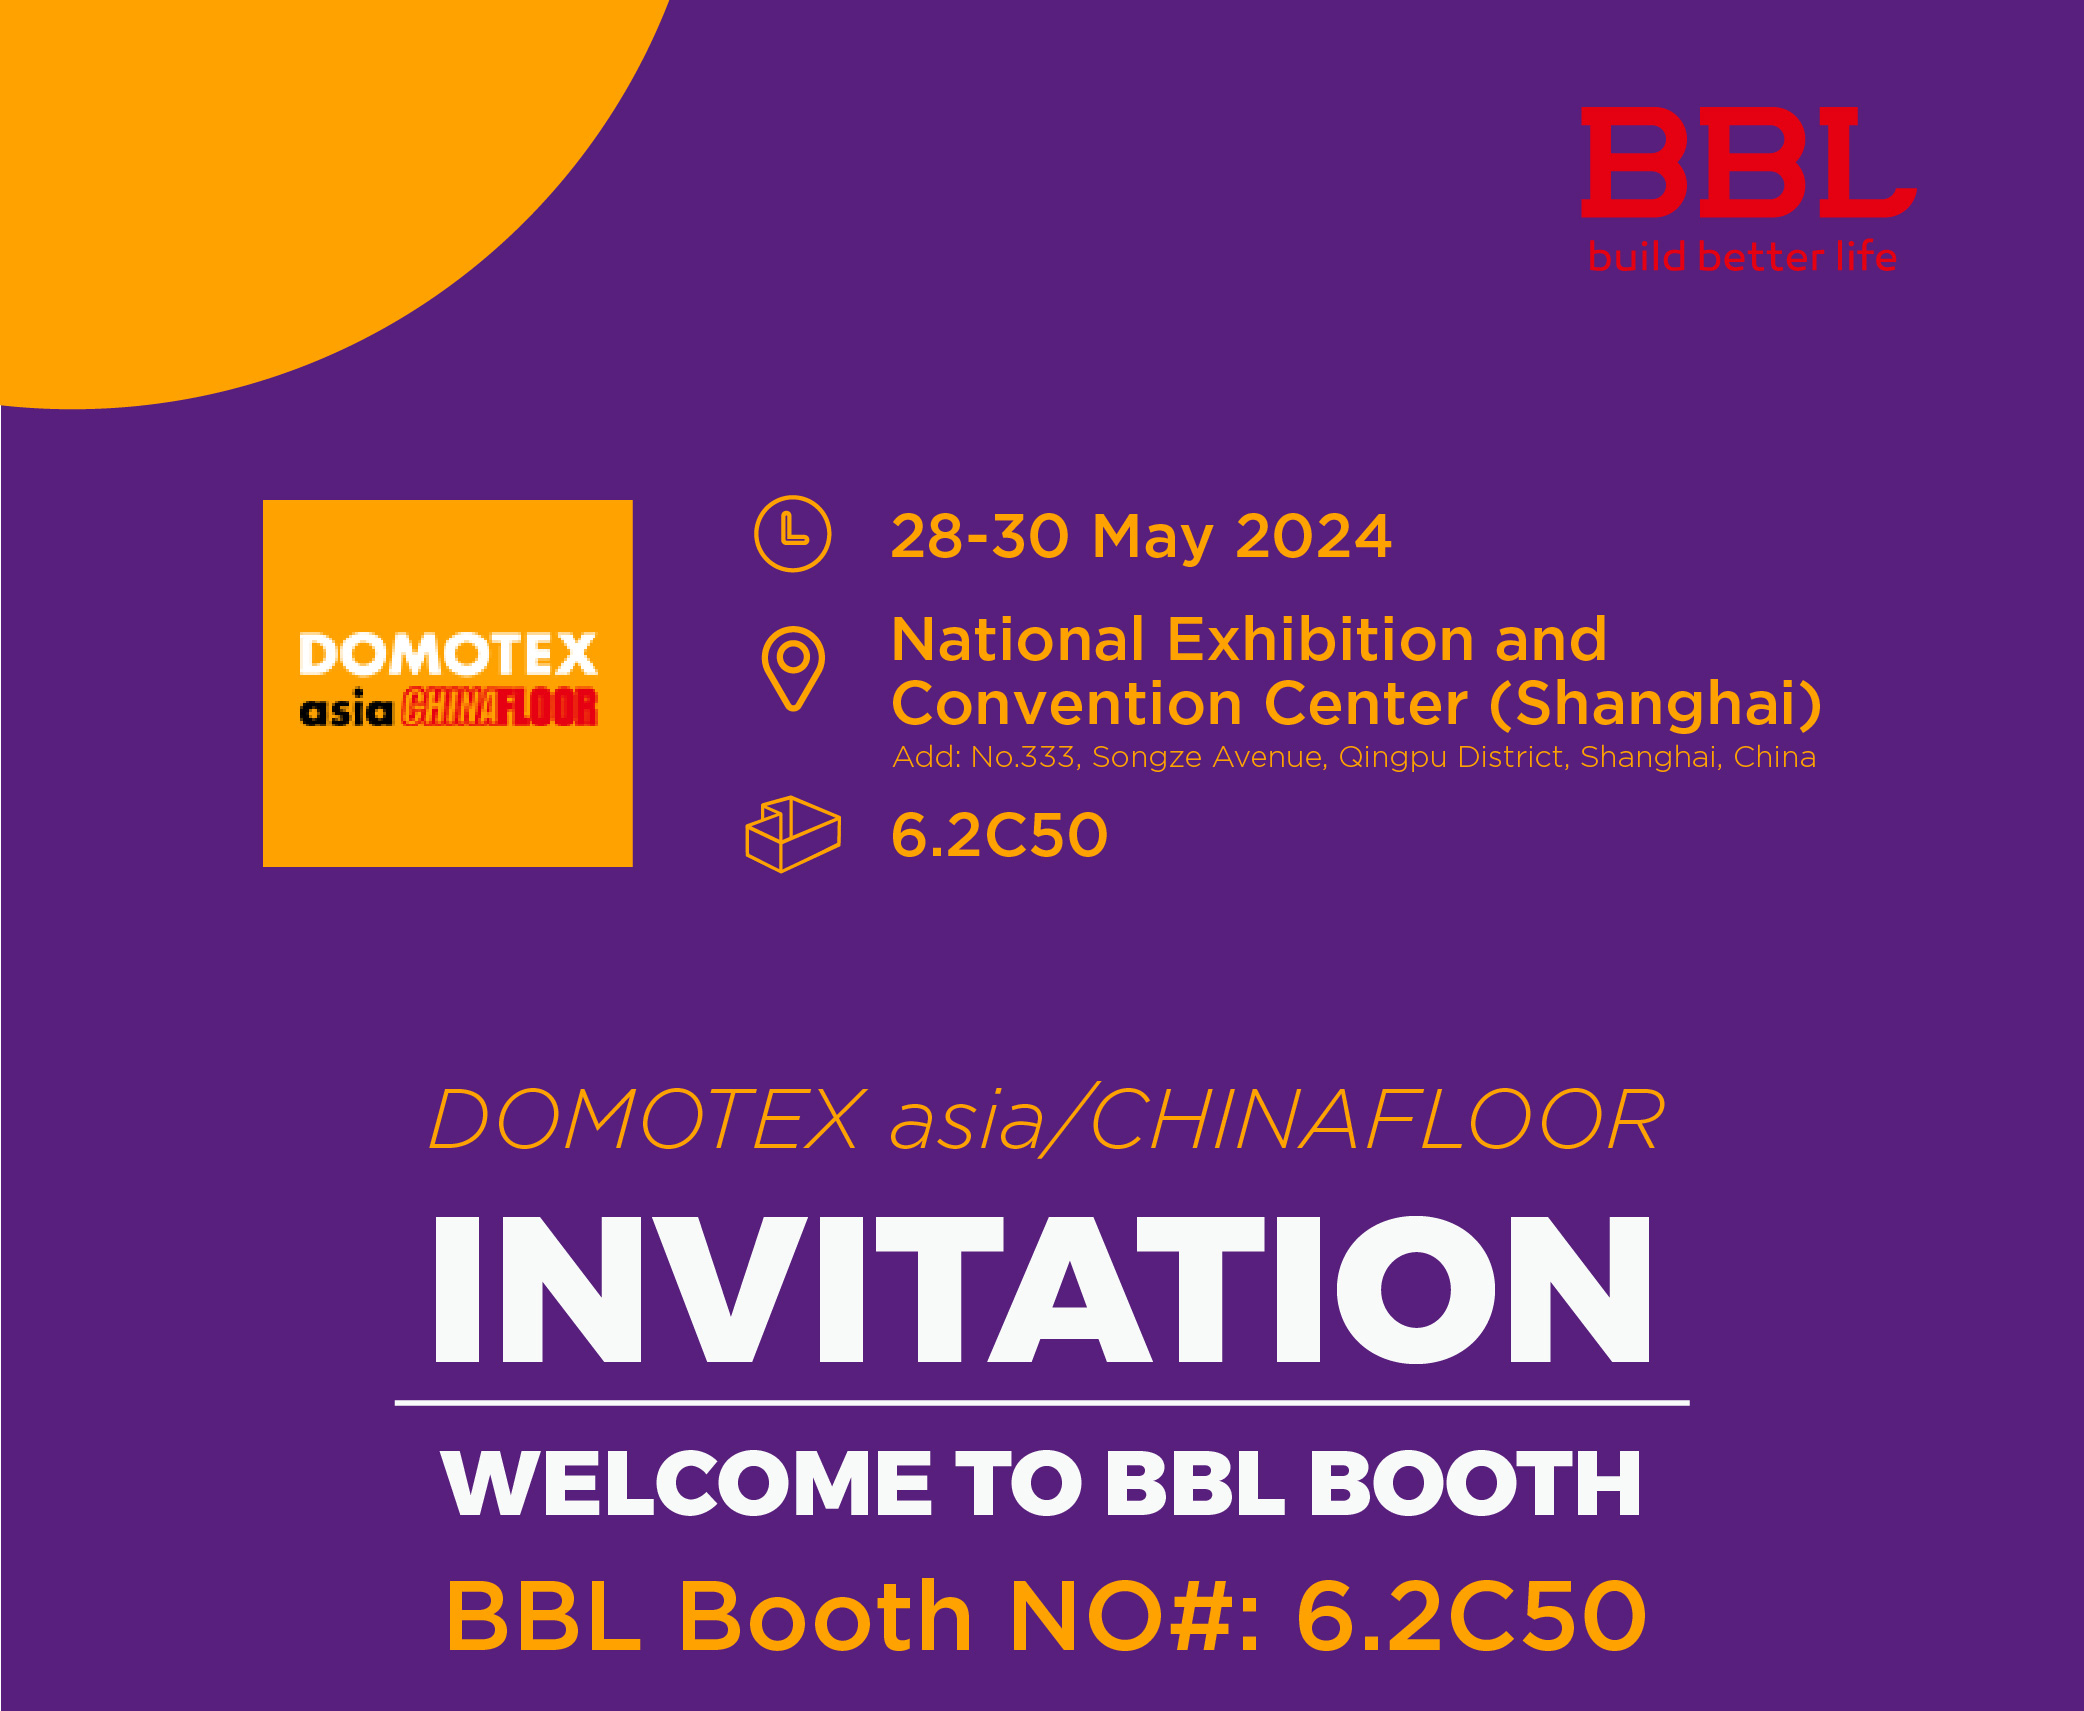 Welcome to BBL Booth at the Domotex Shanghai 2024